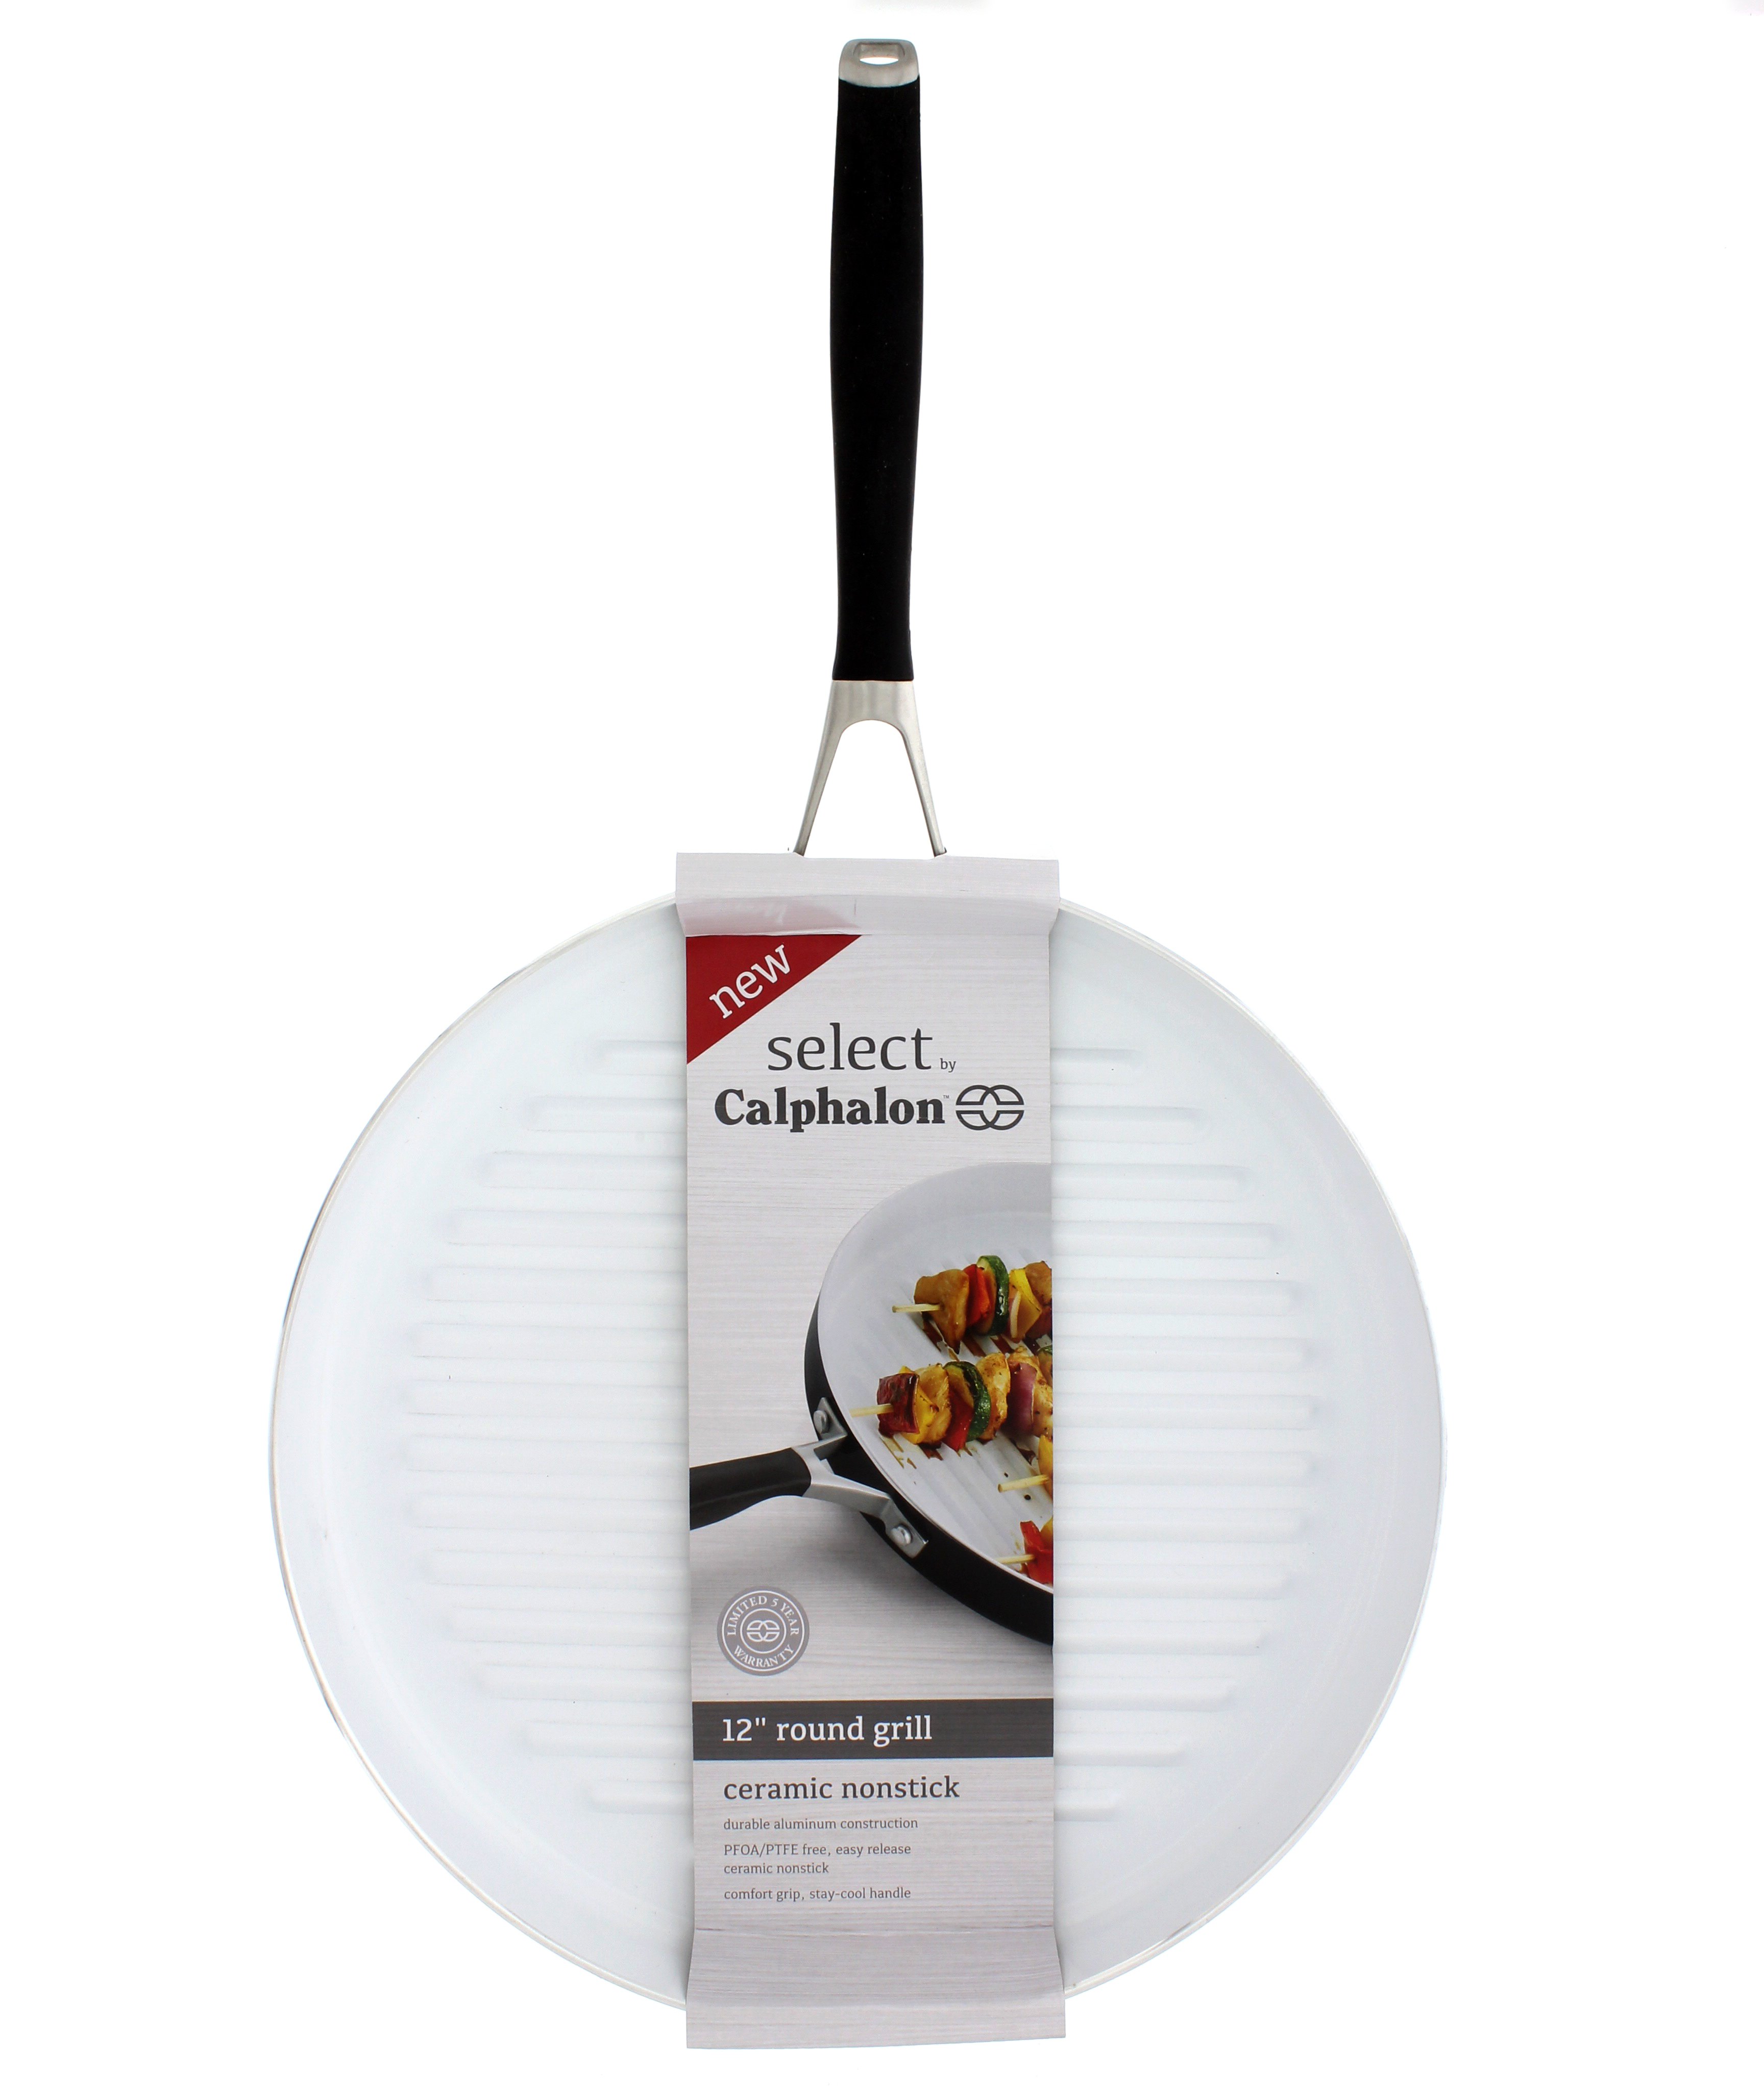 Select By Calphalon 12” Round Grill Ceramic Nonstick Pan 